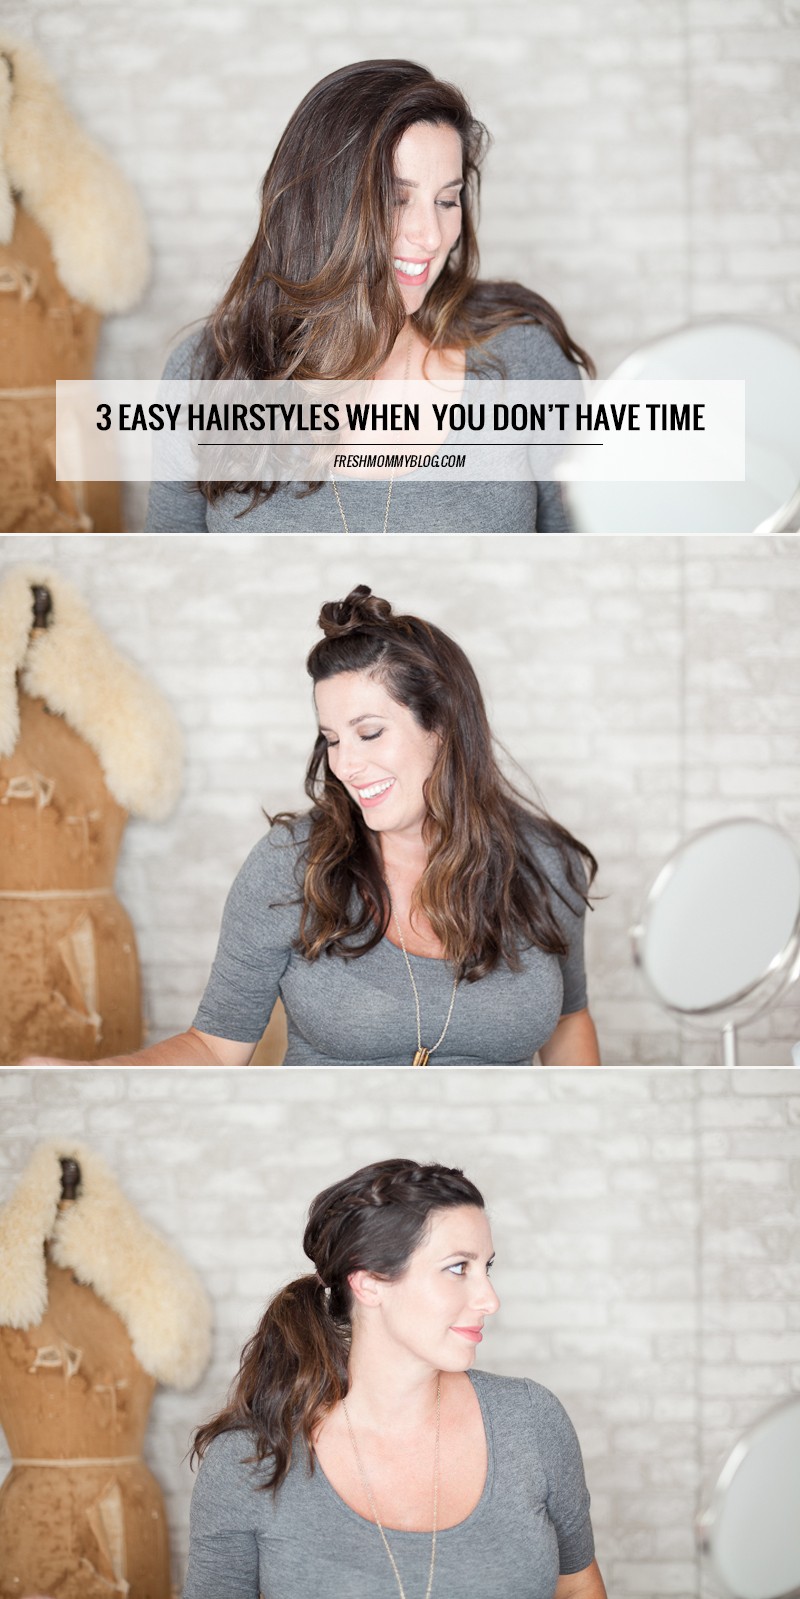 Mom On The Run Series from Fresh Mommy Blog - 3 Easy Hairstyles When You Don't Have Time